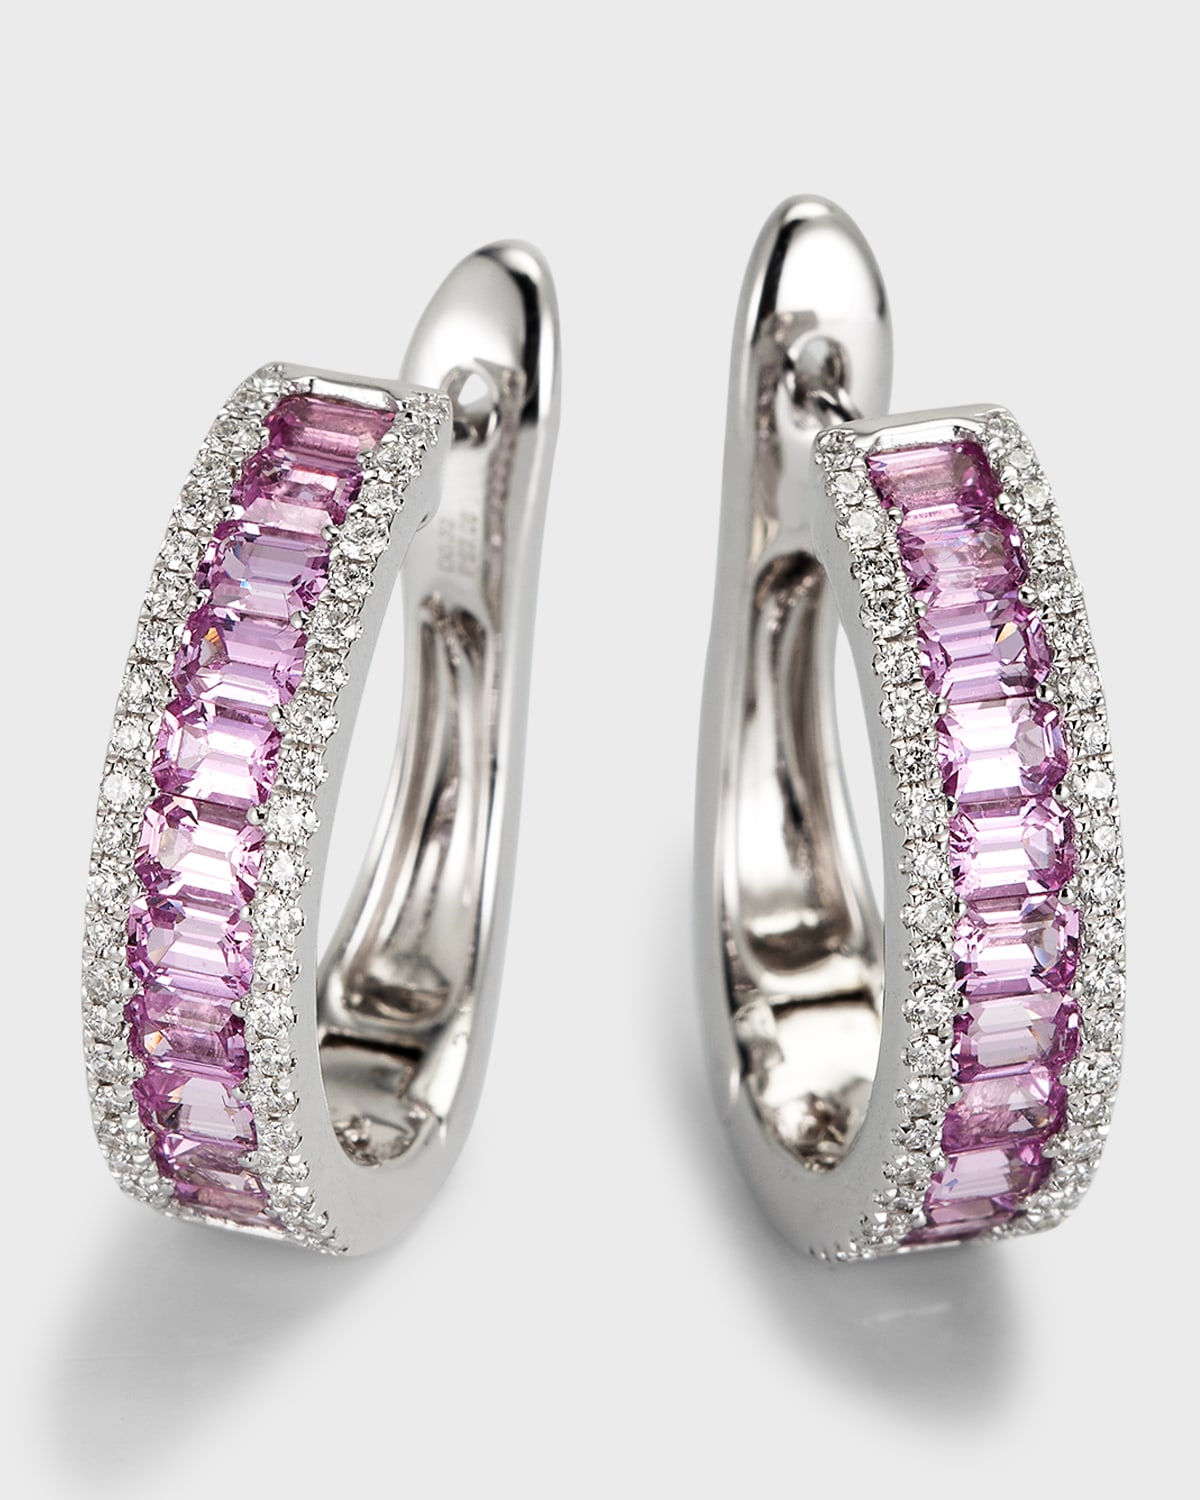 David Kord 18k White Gold Earrings With Pink Sapphires And Diamonds